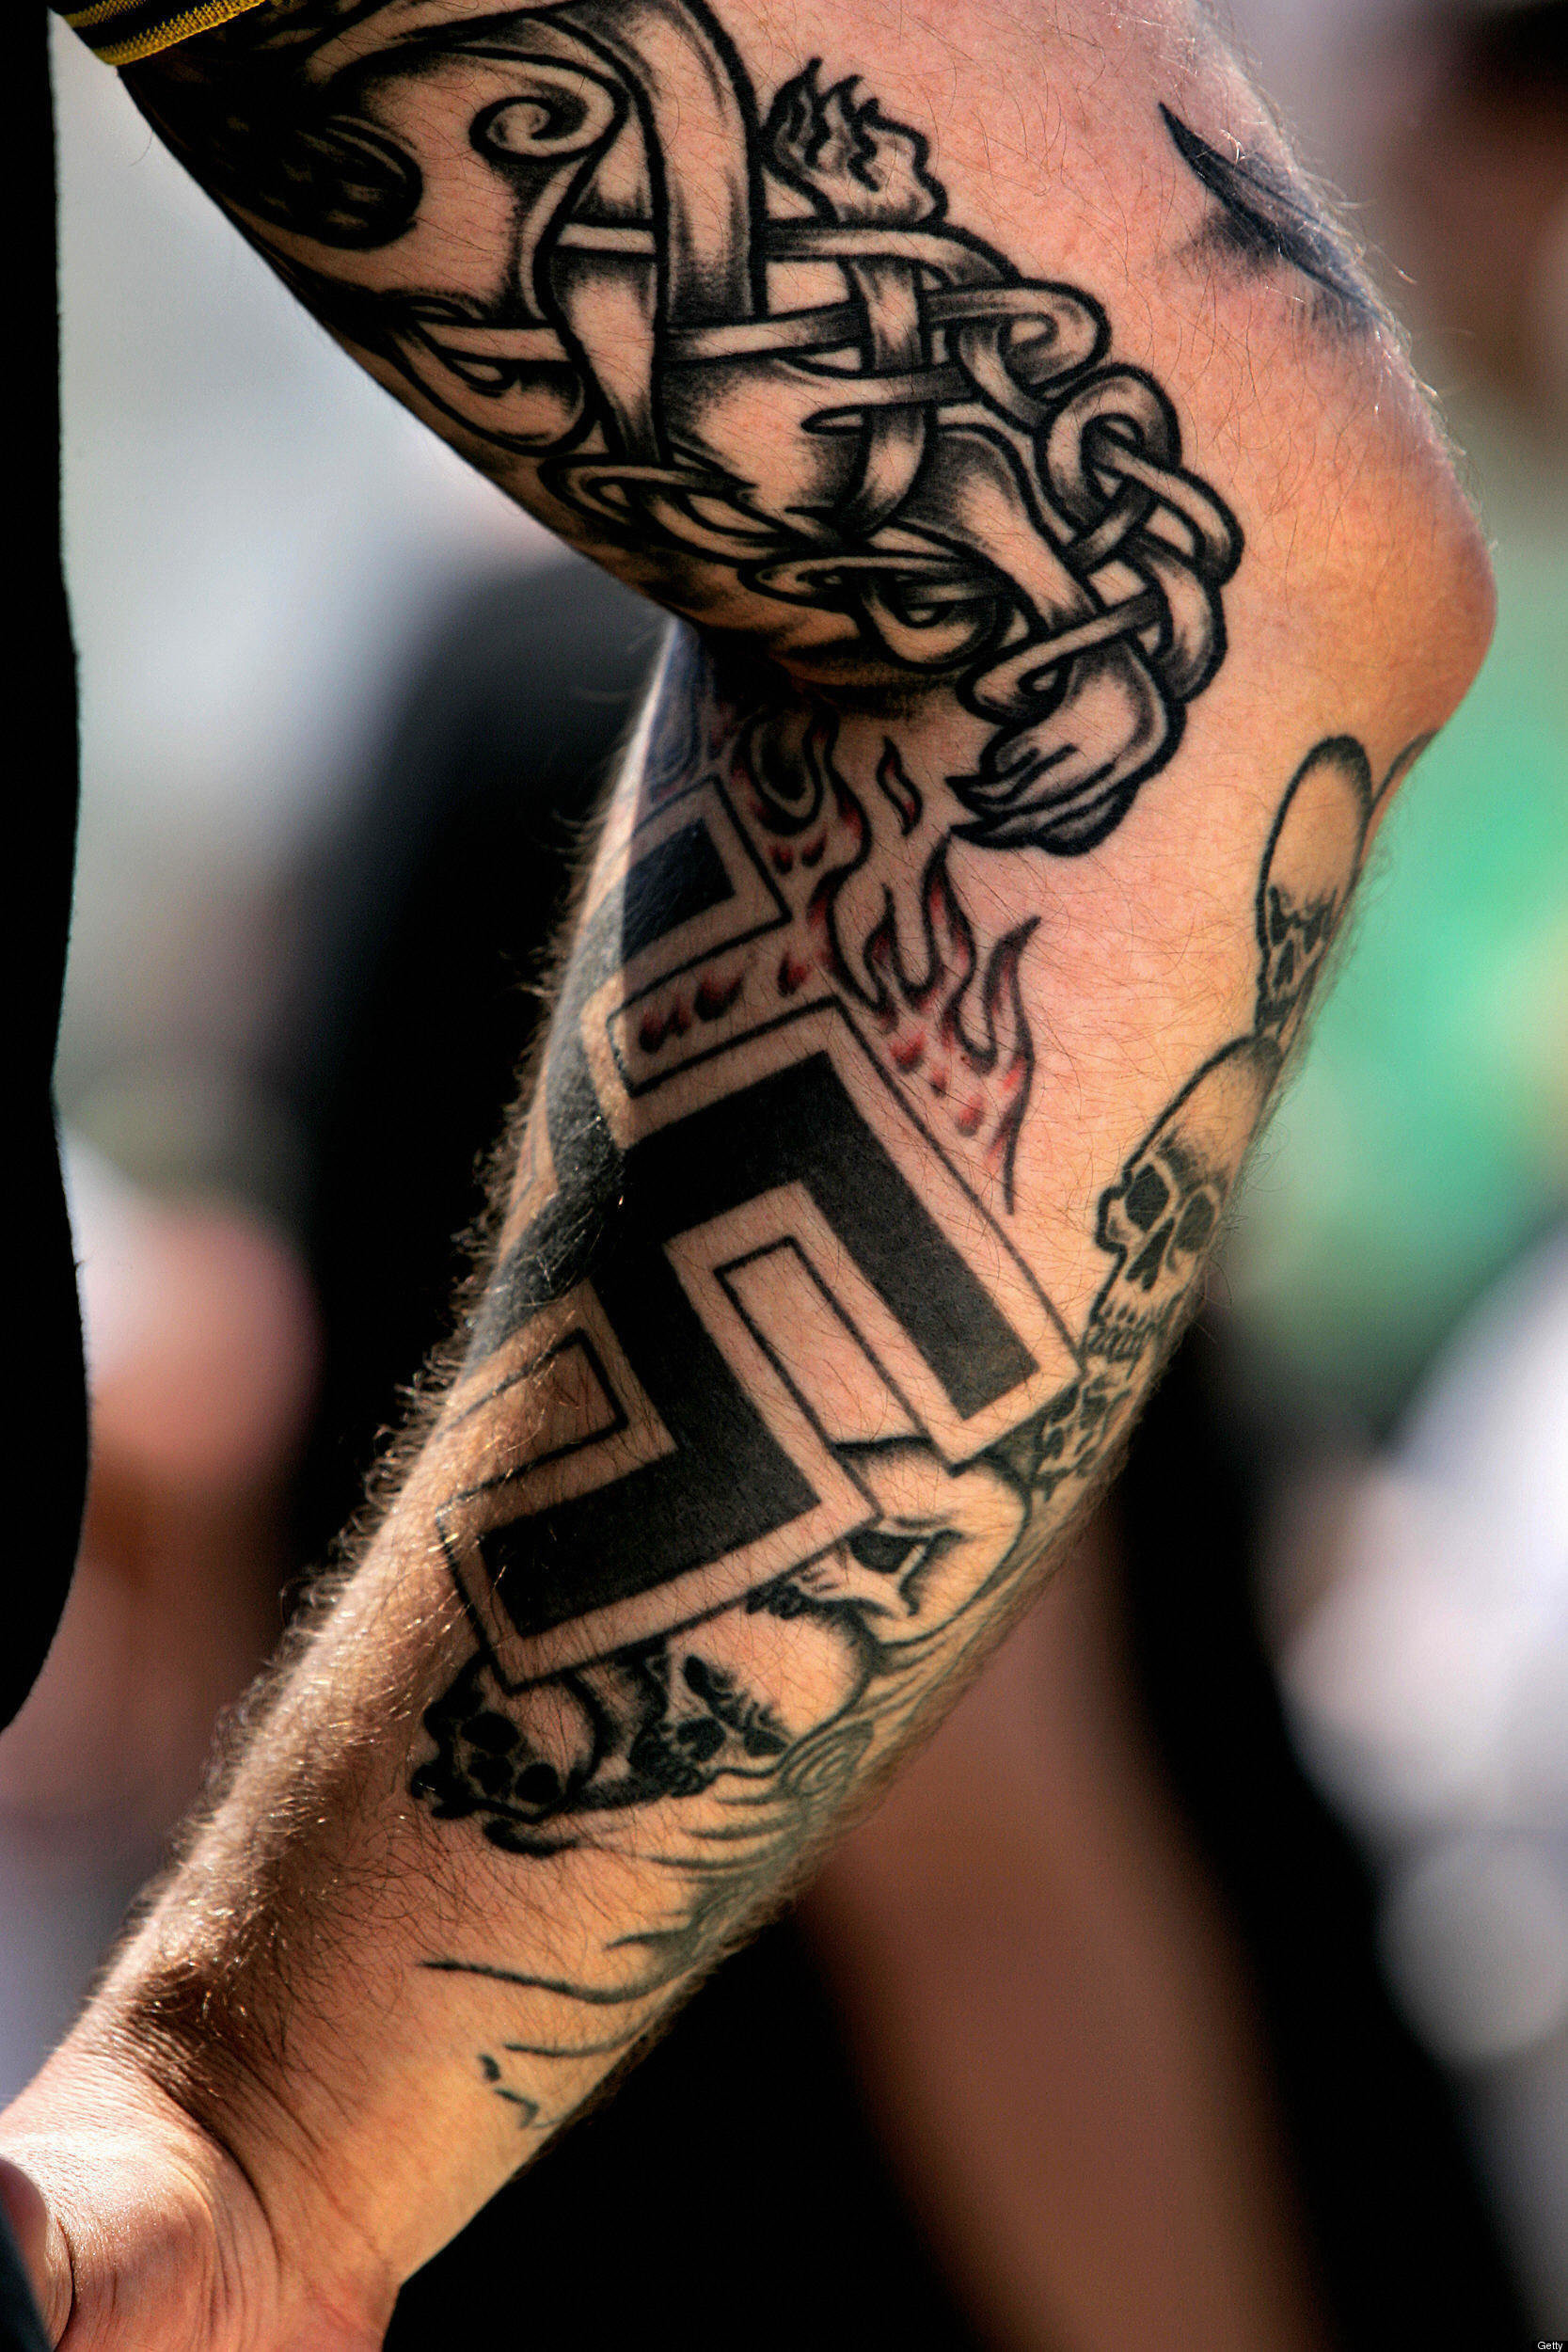 How much does a sleeve tattoo cost on average in Florida? - Quora